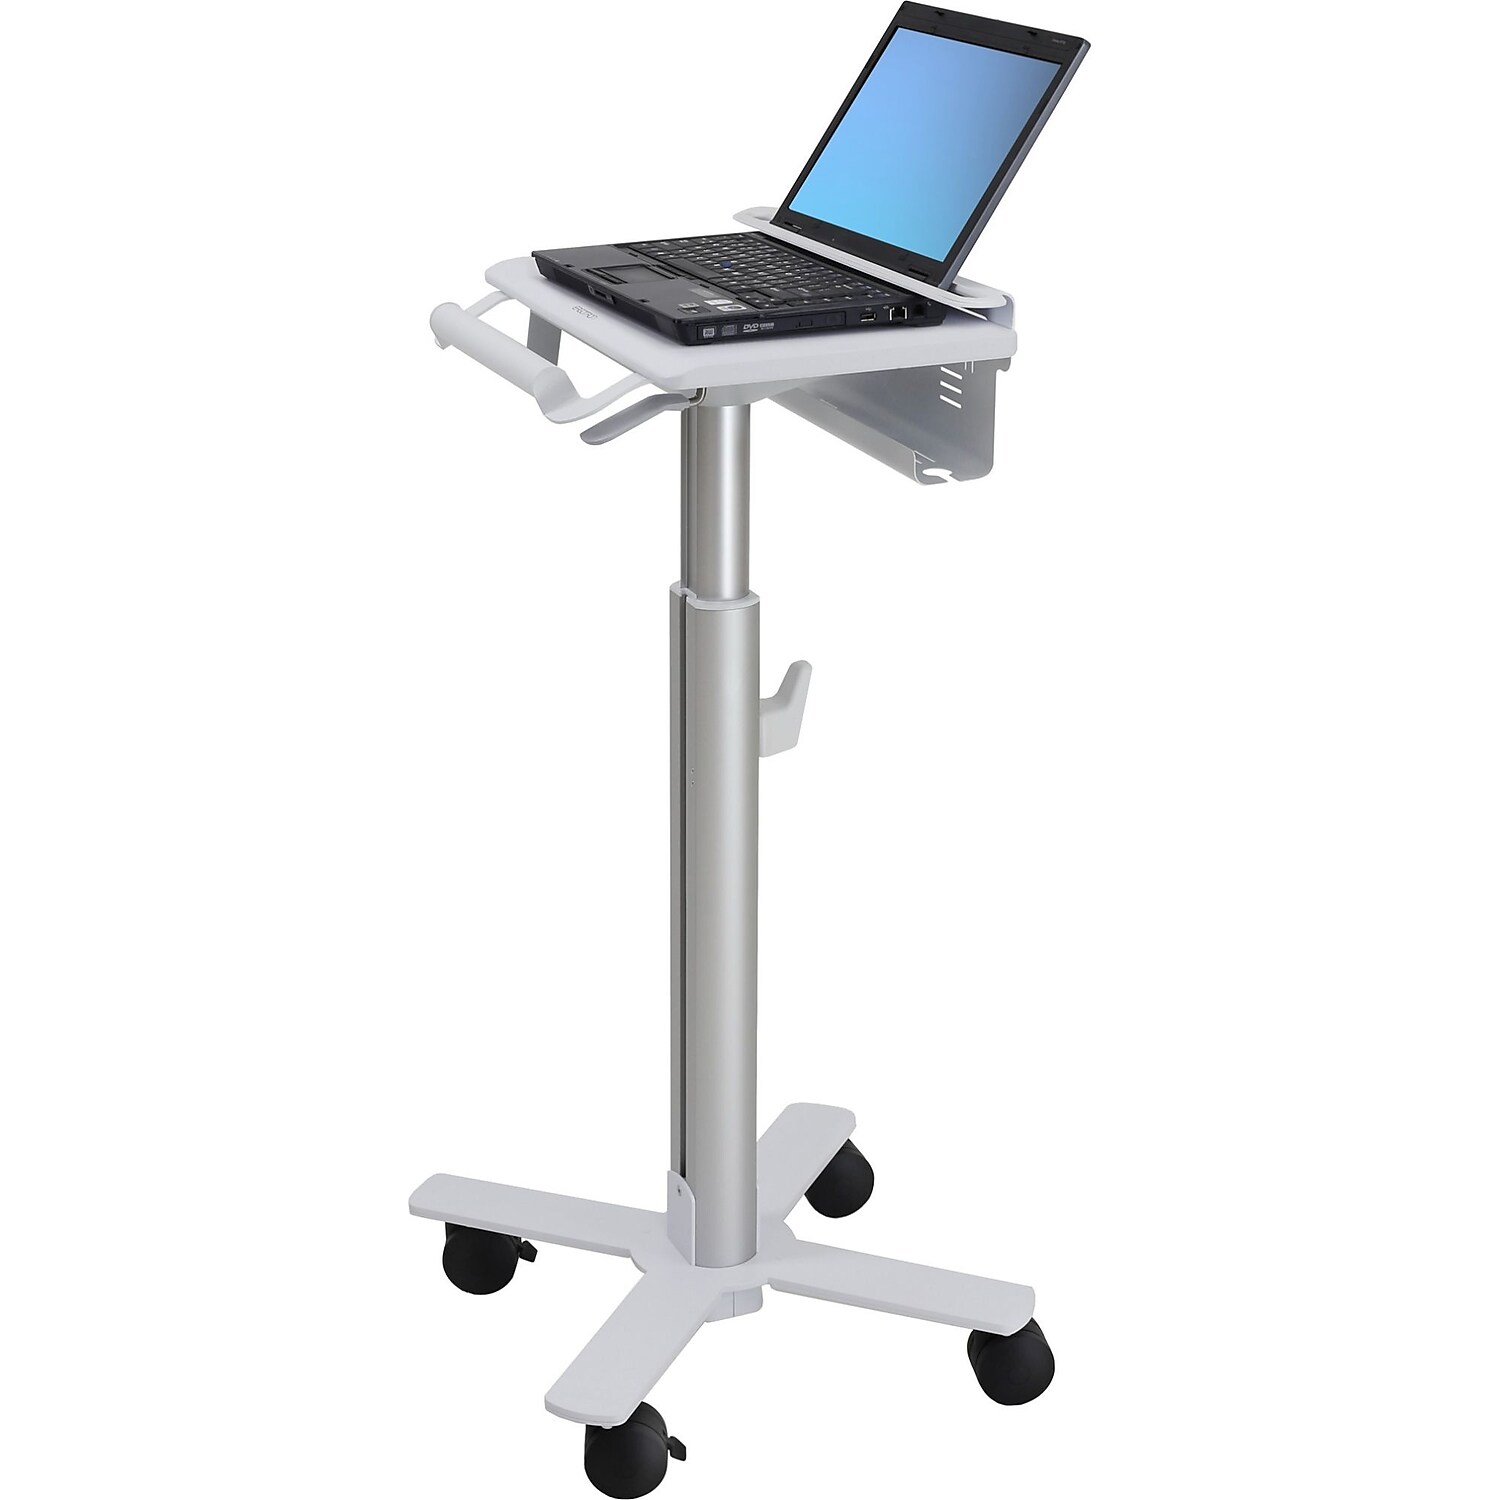 Ergotron SV10-1100-0 15 in. Height Adjustable & Portable StyleView Laptop Cart, SV10 - image 1 of 2